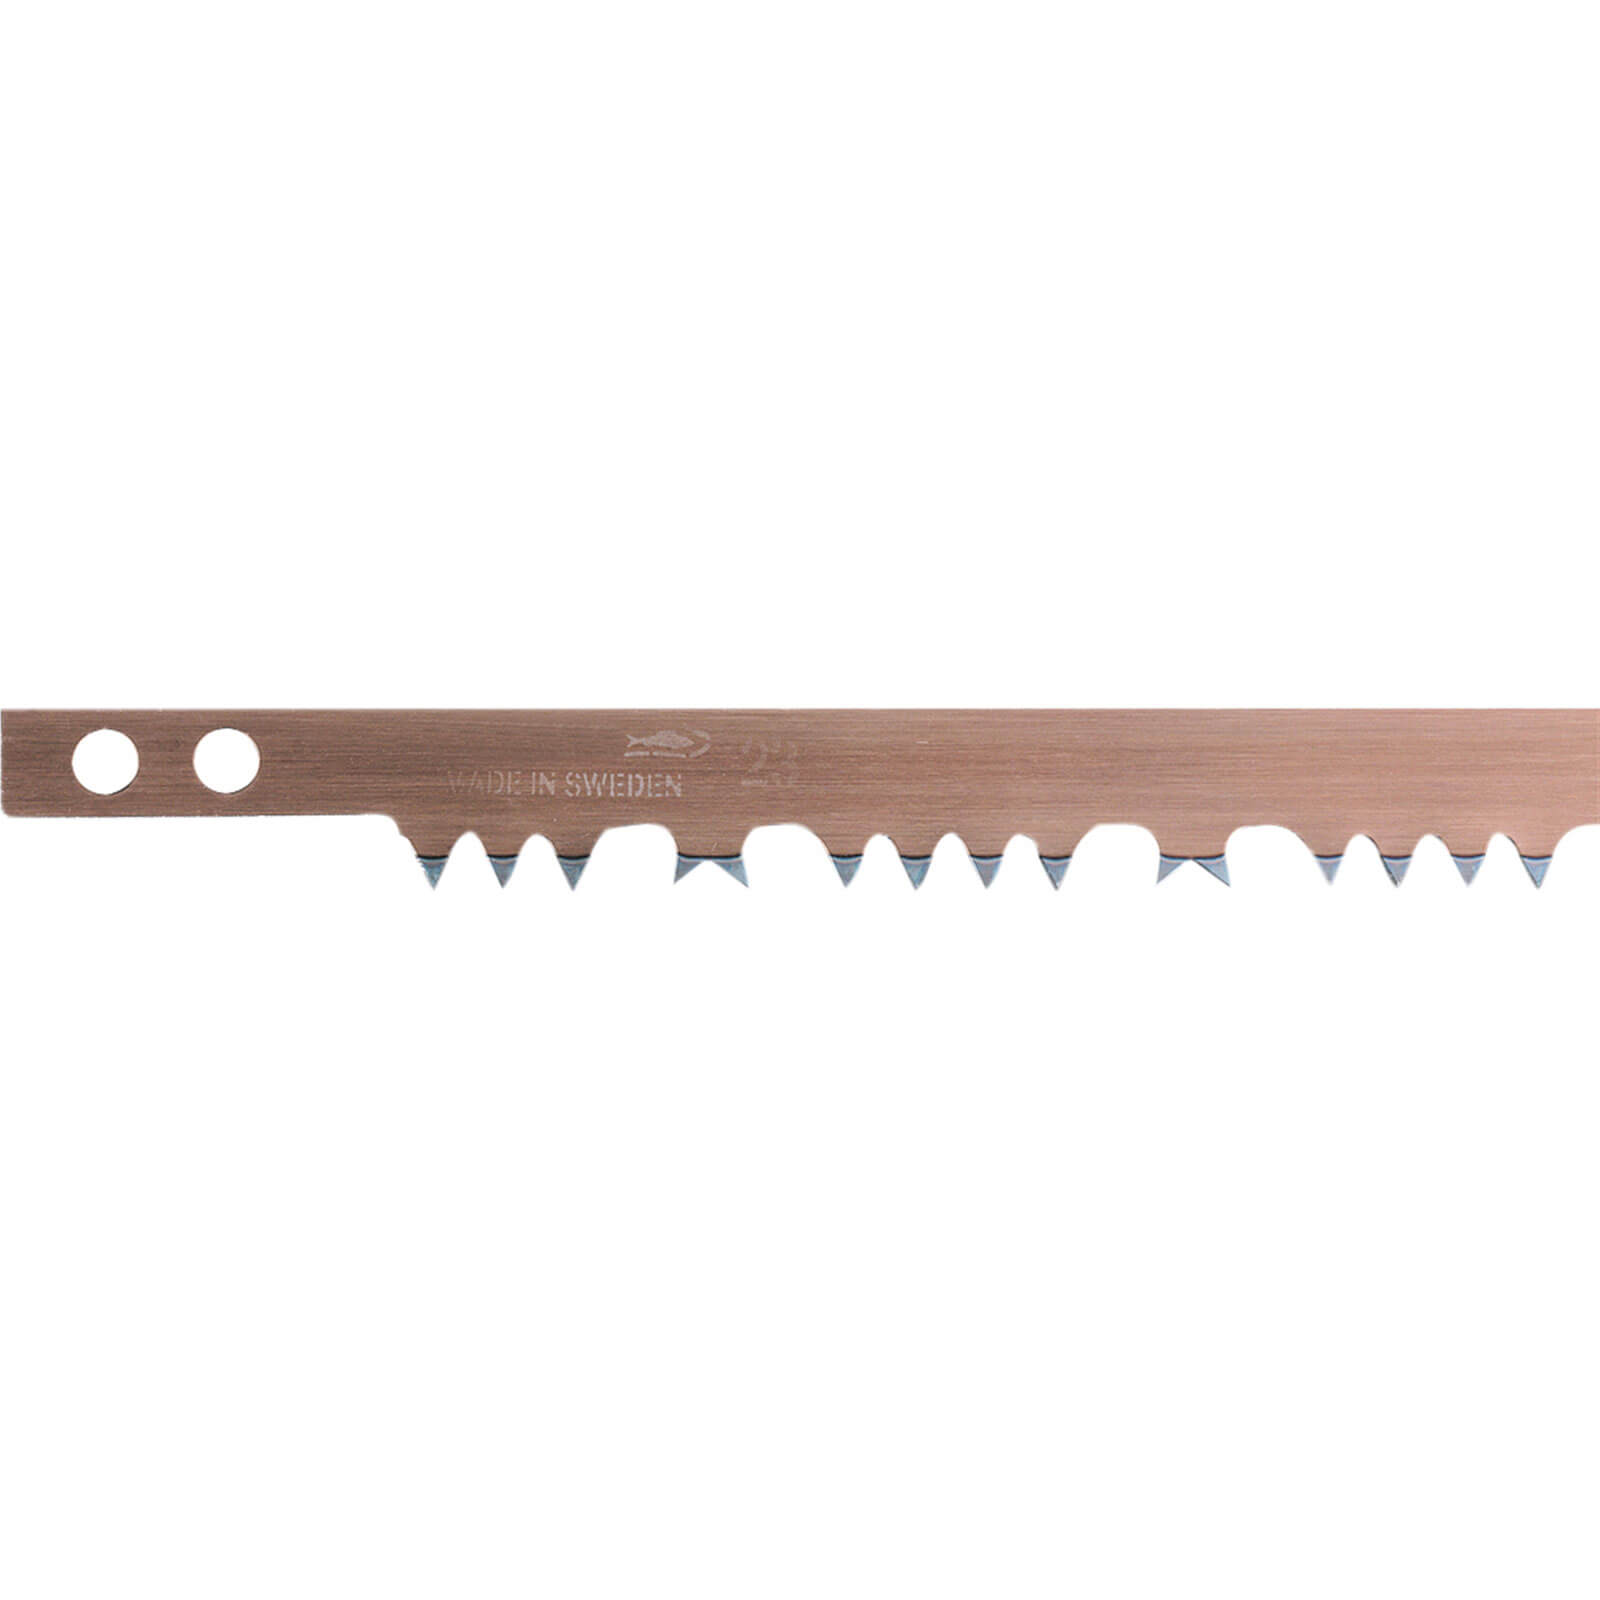 Image of Bahco Hard Point Bow Saw Blade for Green Wood 24" / 600mm